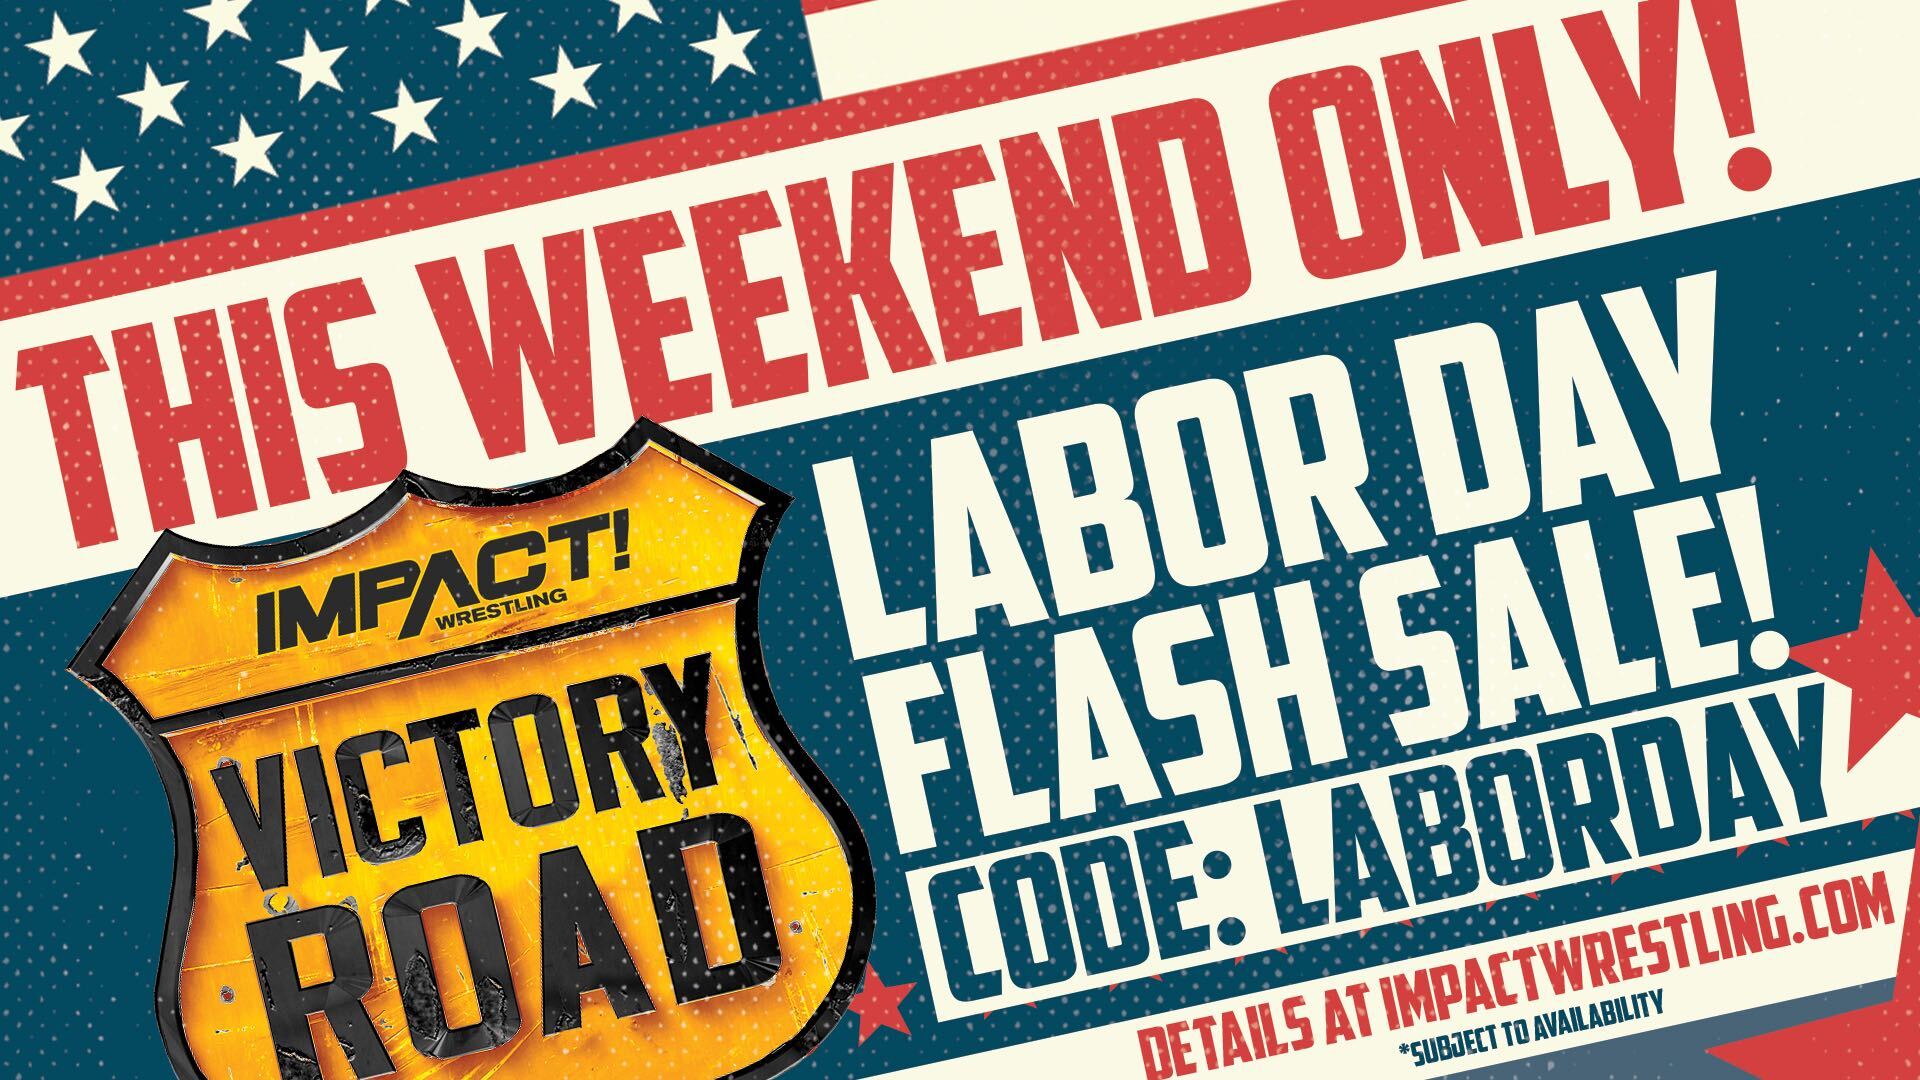 Save 20% on Victory Road Combo Tickets During Our Labor Day Sale, Get the Ultimate LIVE Experience With the Titanium VIP Ticket Package